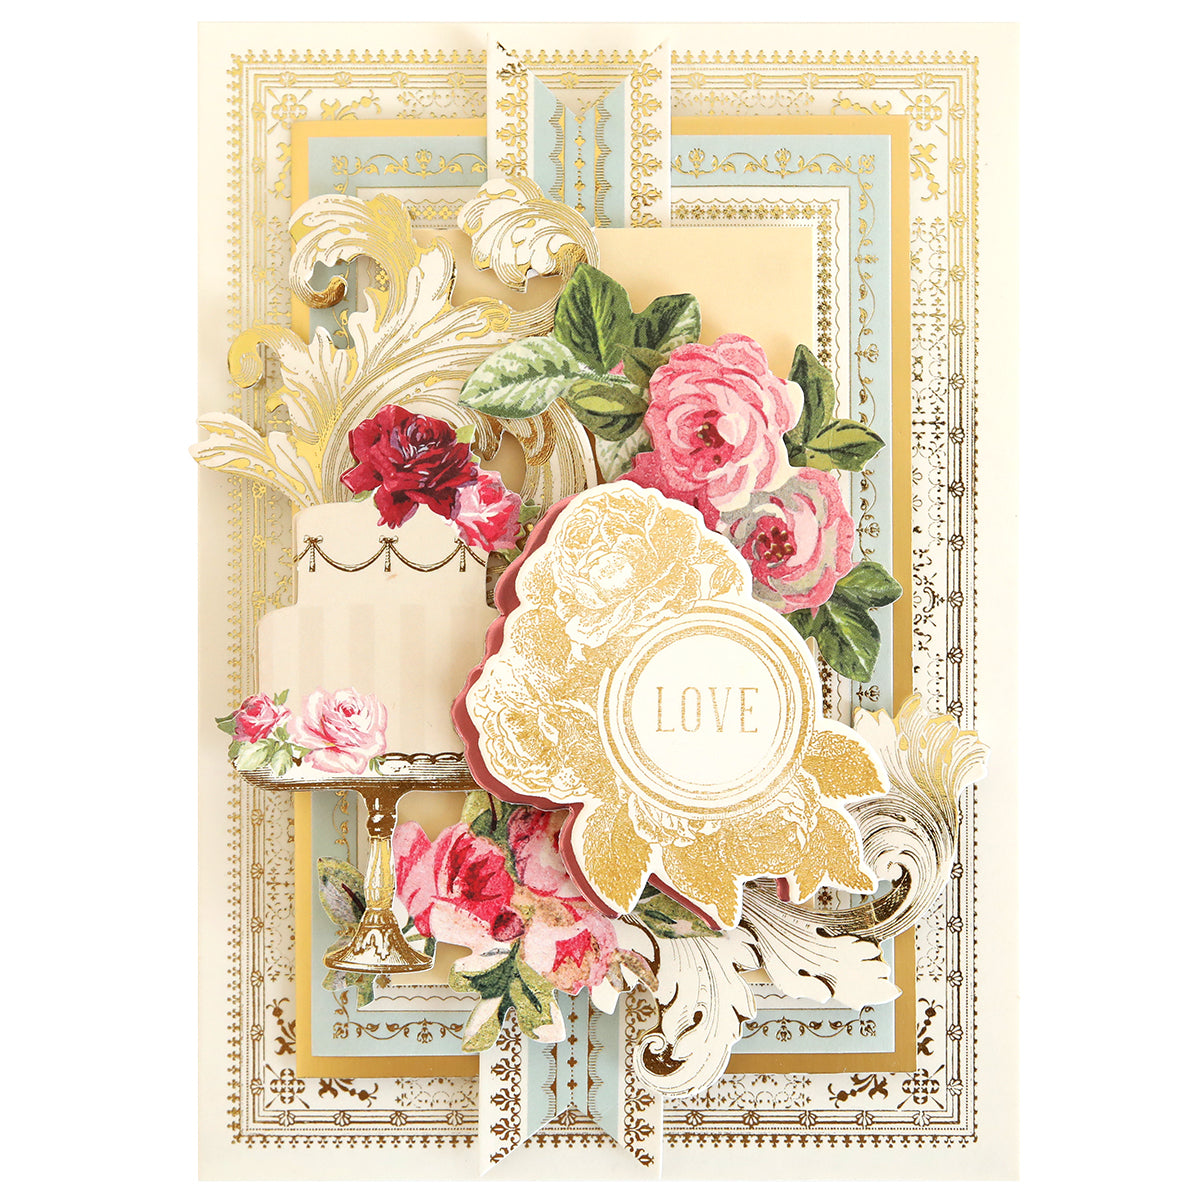 An ornate greeting card featuring floral designs from Flower Language Stamps and Dies and the word "love" in the center.